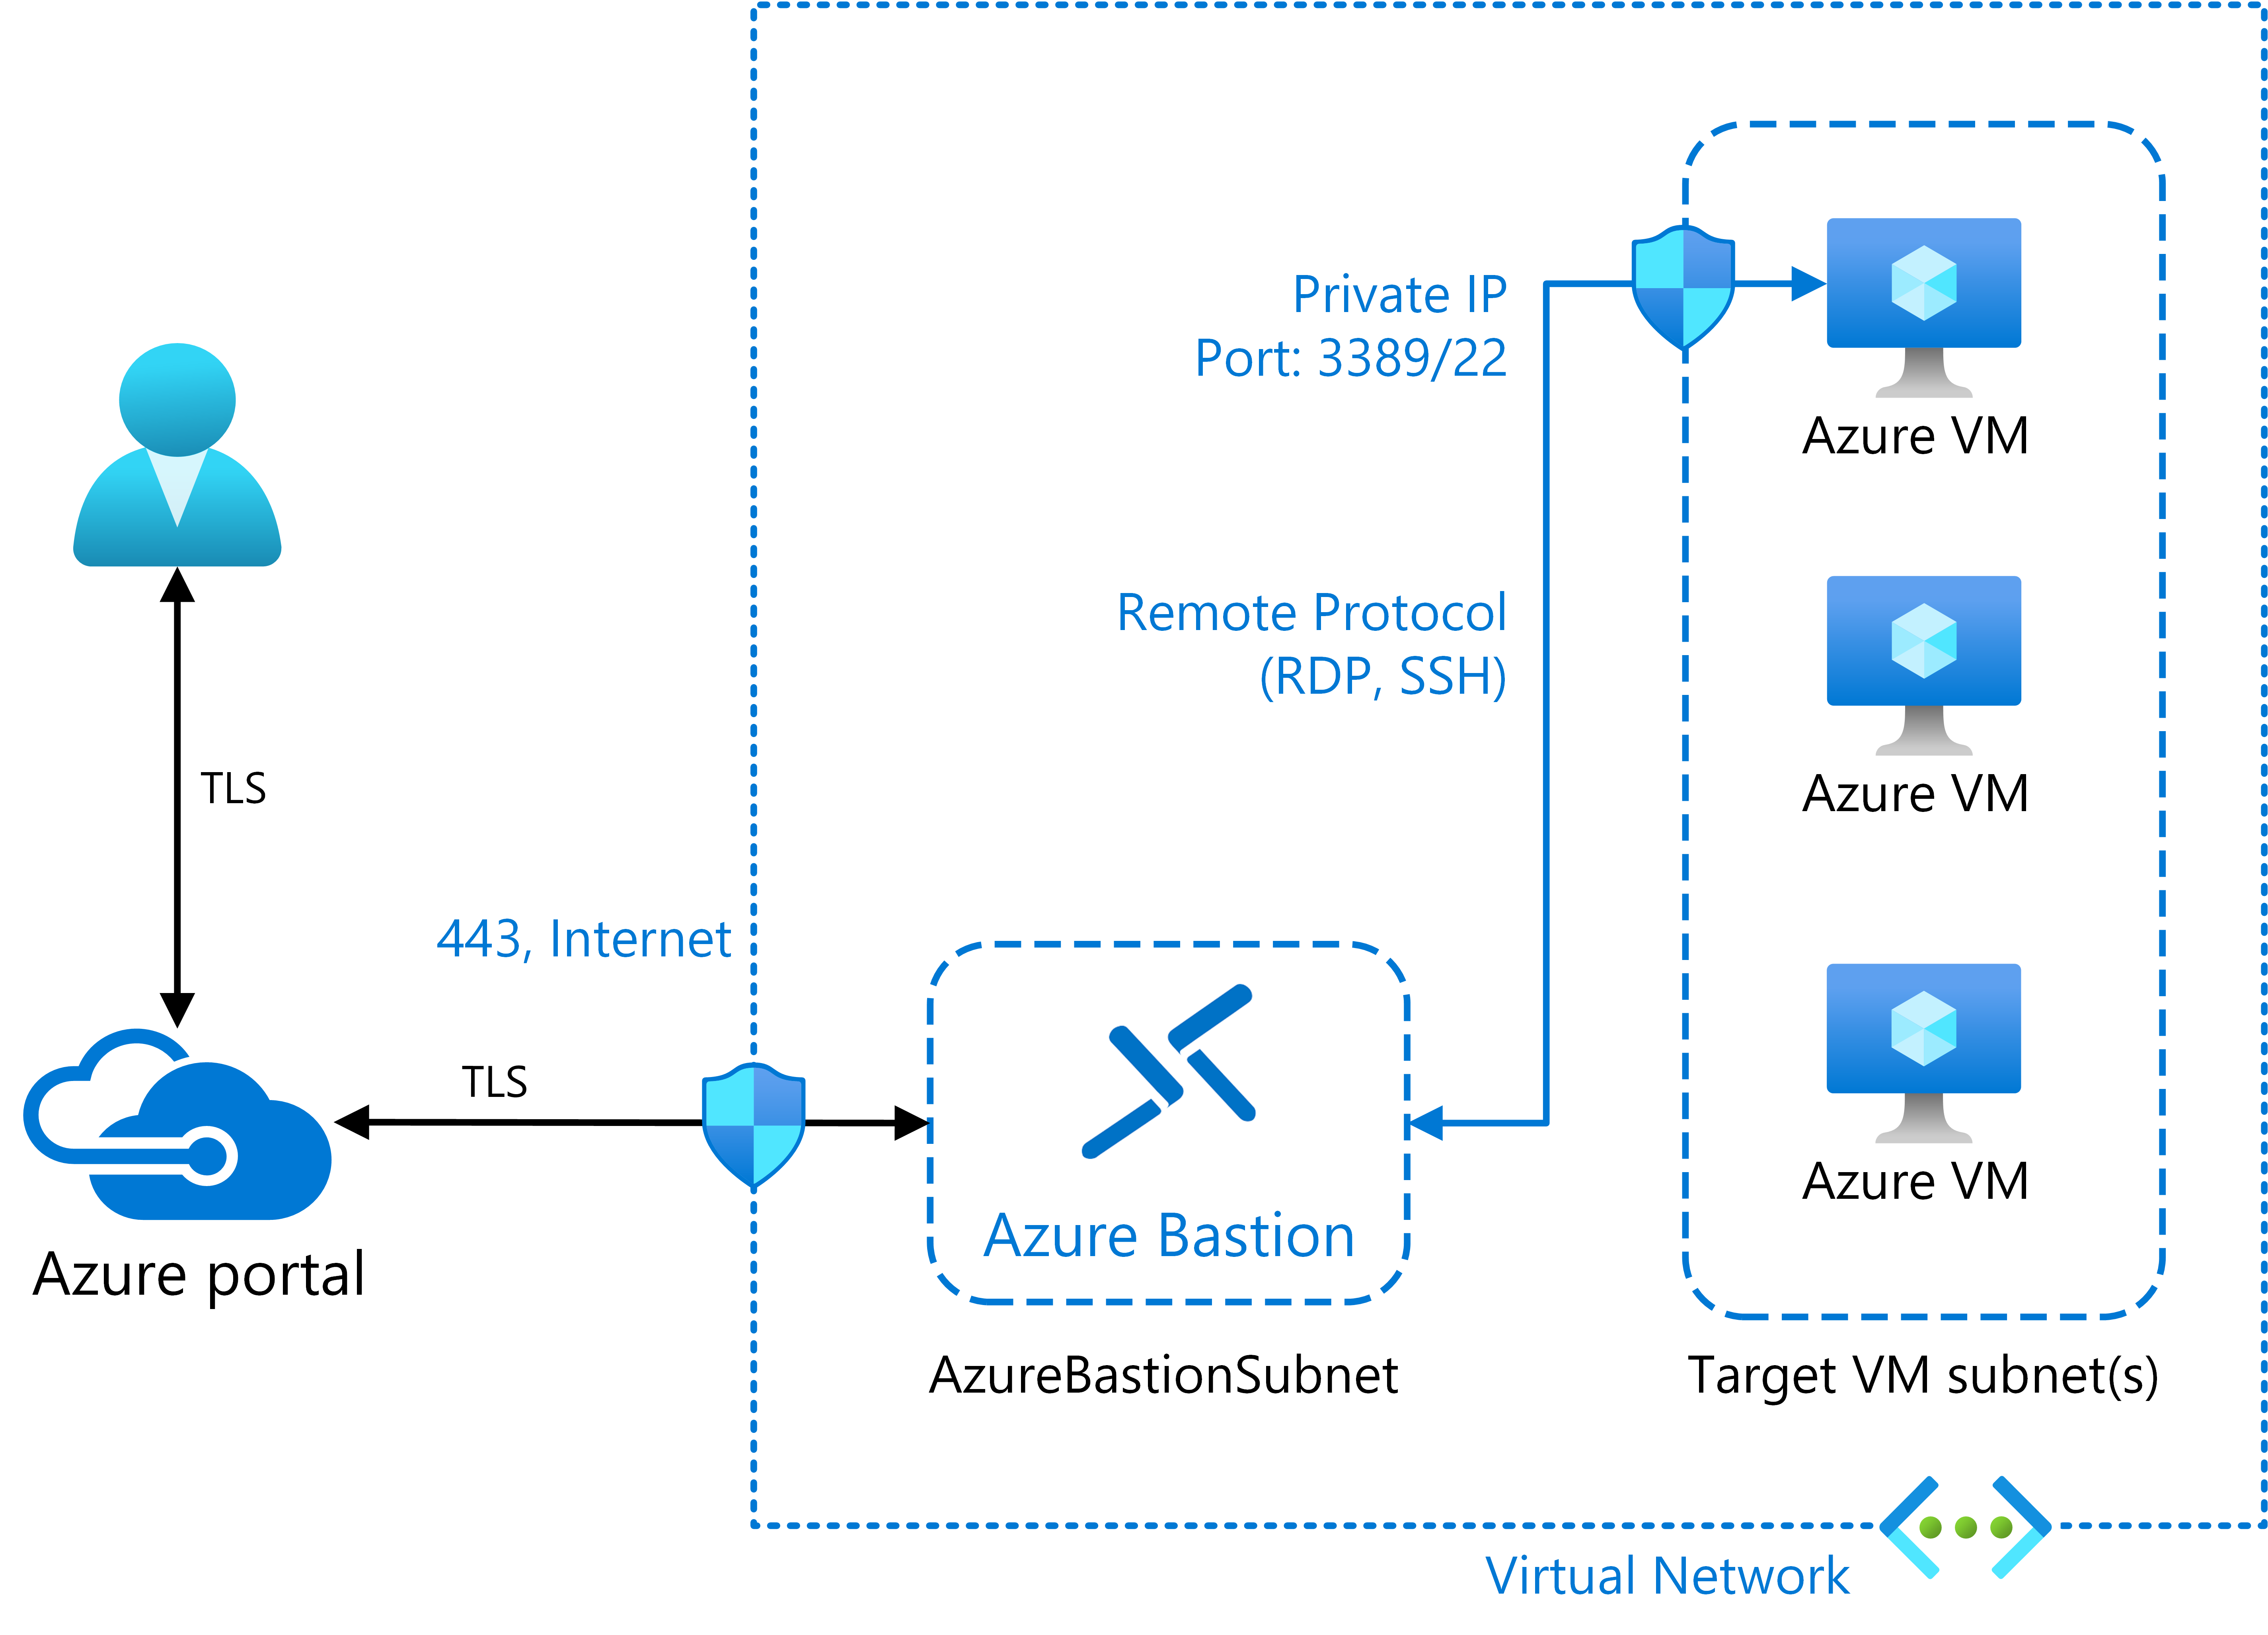 A diagram of the Azure Bastion architecture. Three VMs are protected by an NSG that enables RDP and SSH traffic from an Azure Bastion subnet. The Bastion supports communications only via TCP port 443 from the Azure portal.